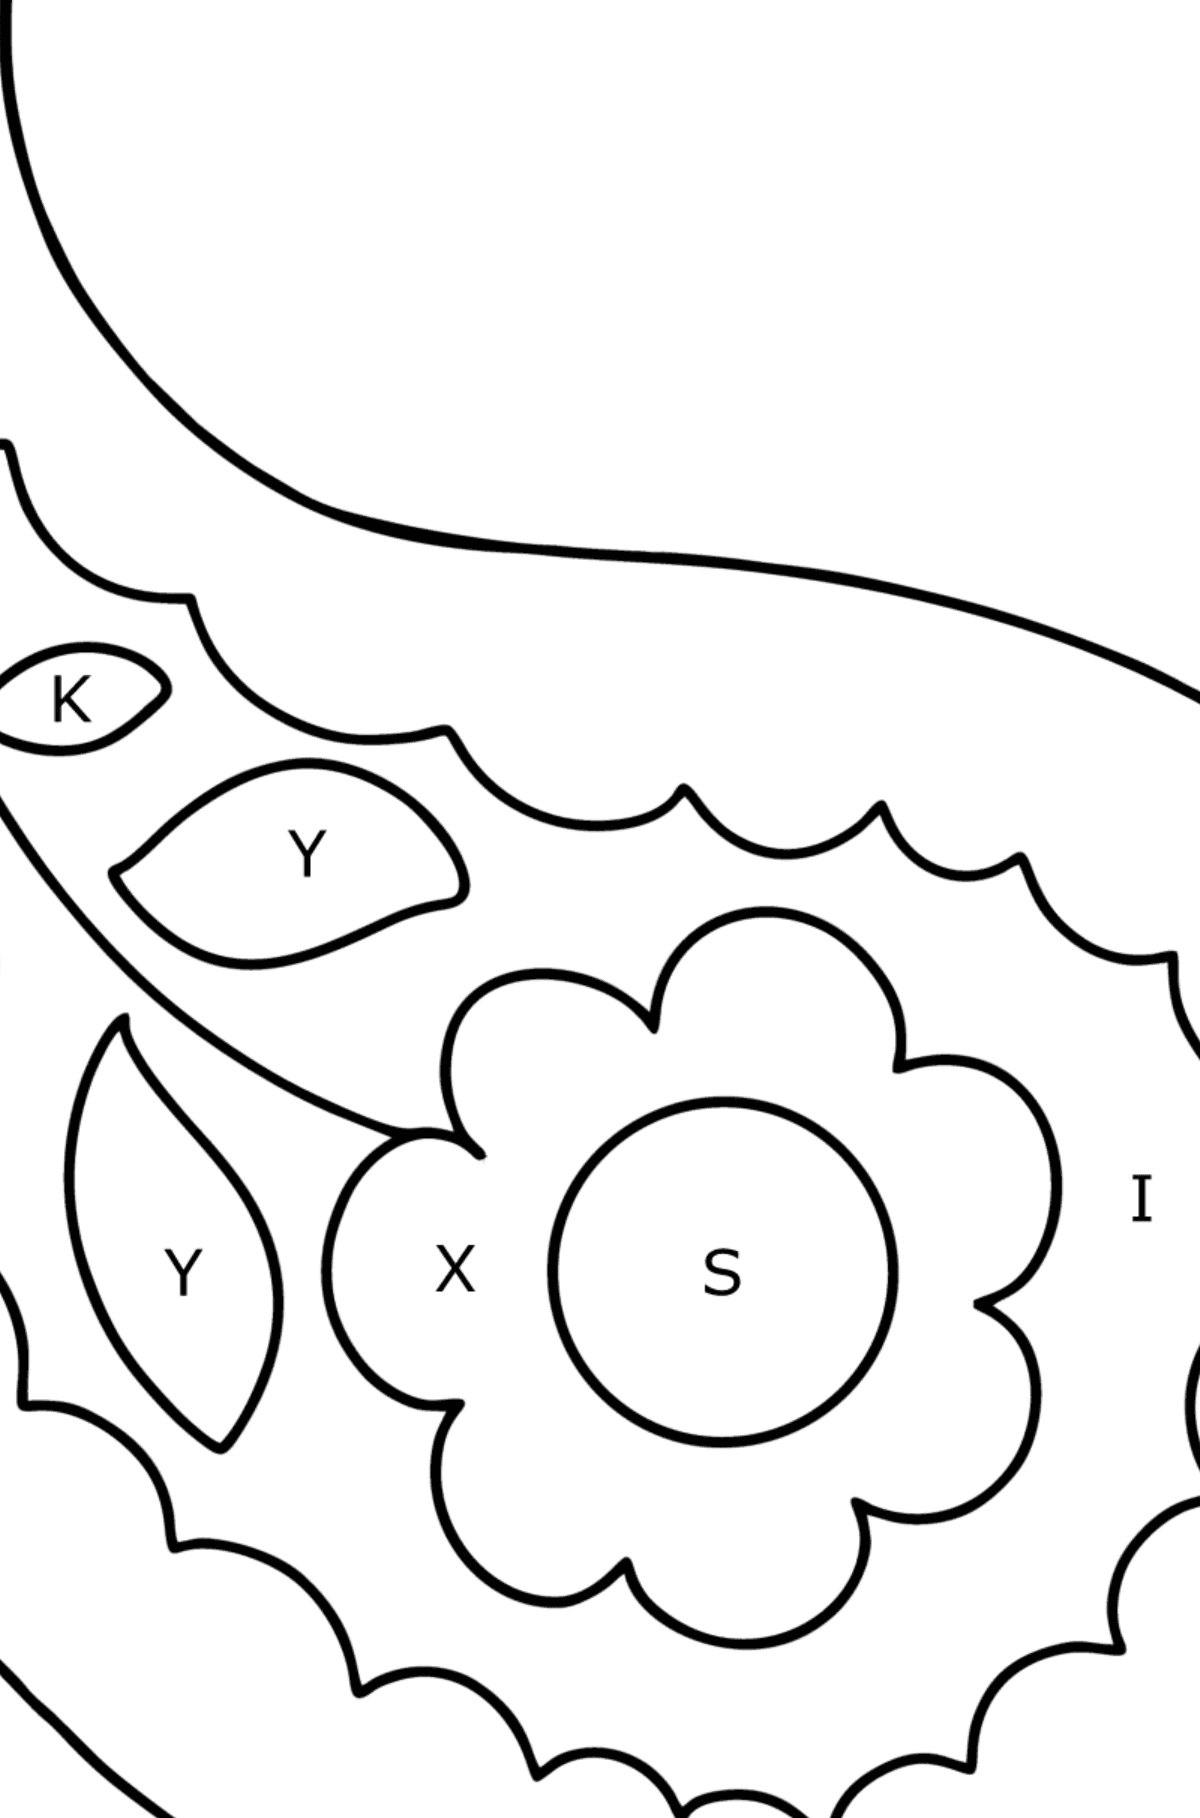 Paisley coloring page for baby - Coloring by Letters for Kids